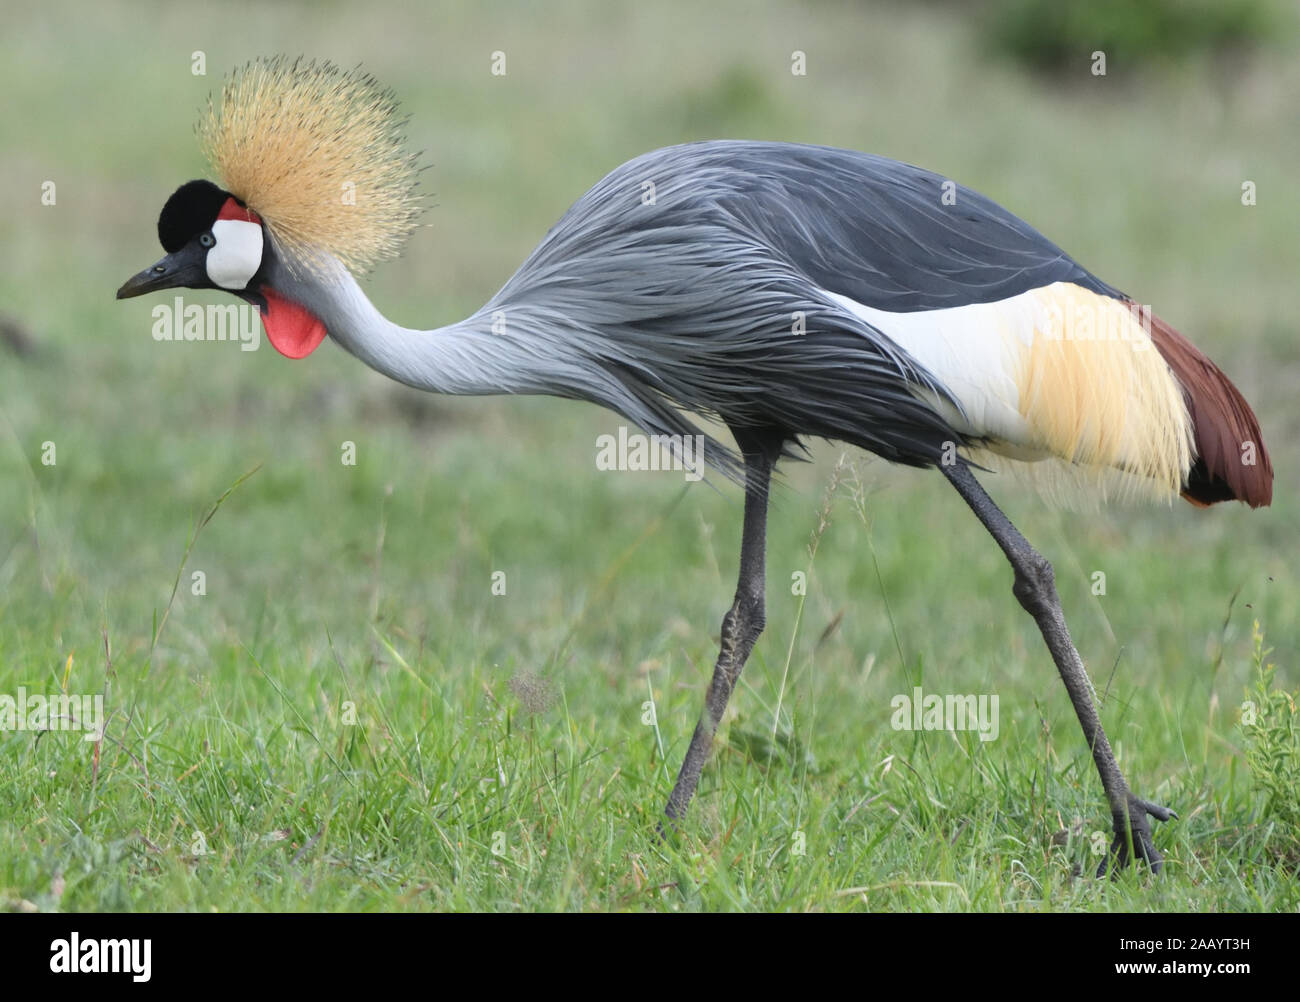 An omnivorous grey crowned crane (Balearica regulorum) searching for seeds and invertebrates in dry grass. Serengeti National Park, Tanzania. Stock Photo